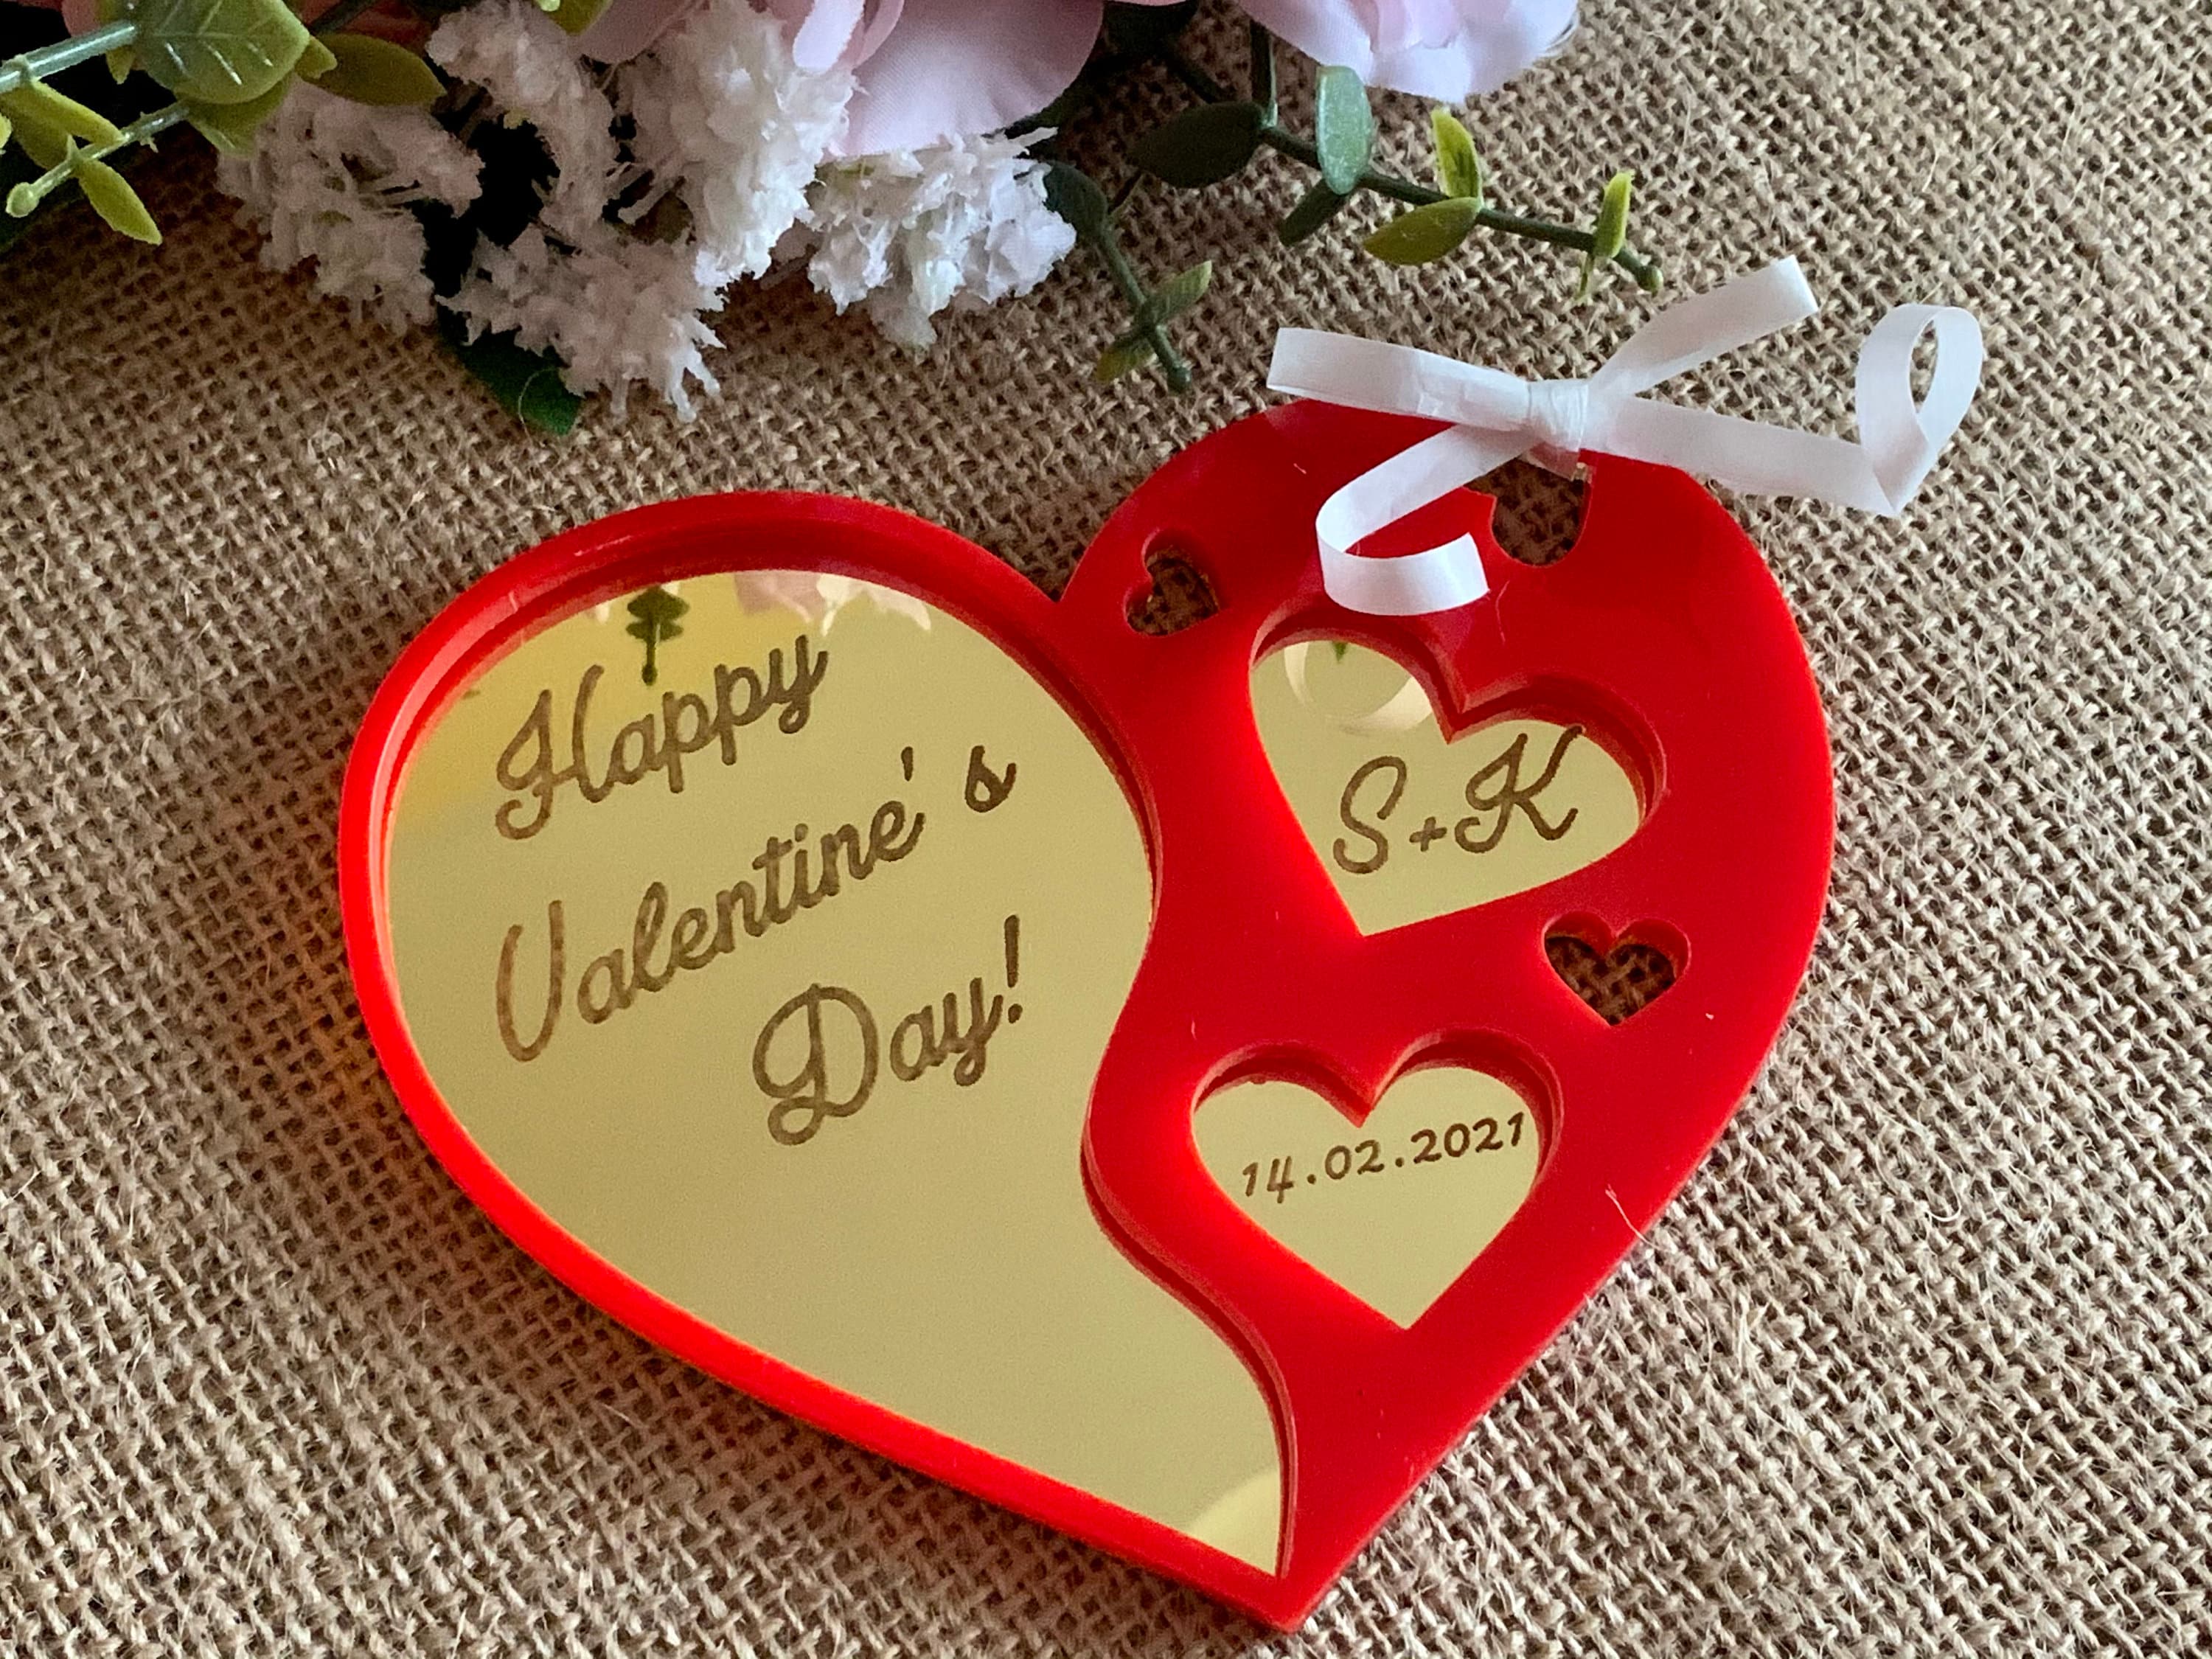 Persoznalized Heart Ornament with Initials & Date Custom Laser Engraved Happy Valentines Day 2023 Handmade Red Gold Acrylic Gift for Couples